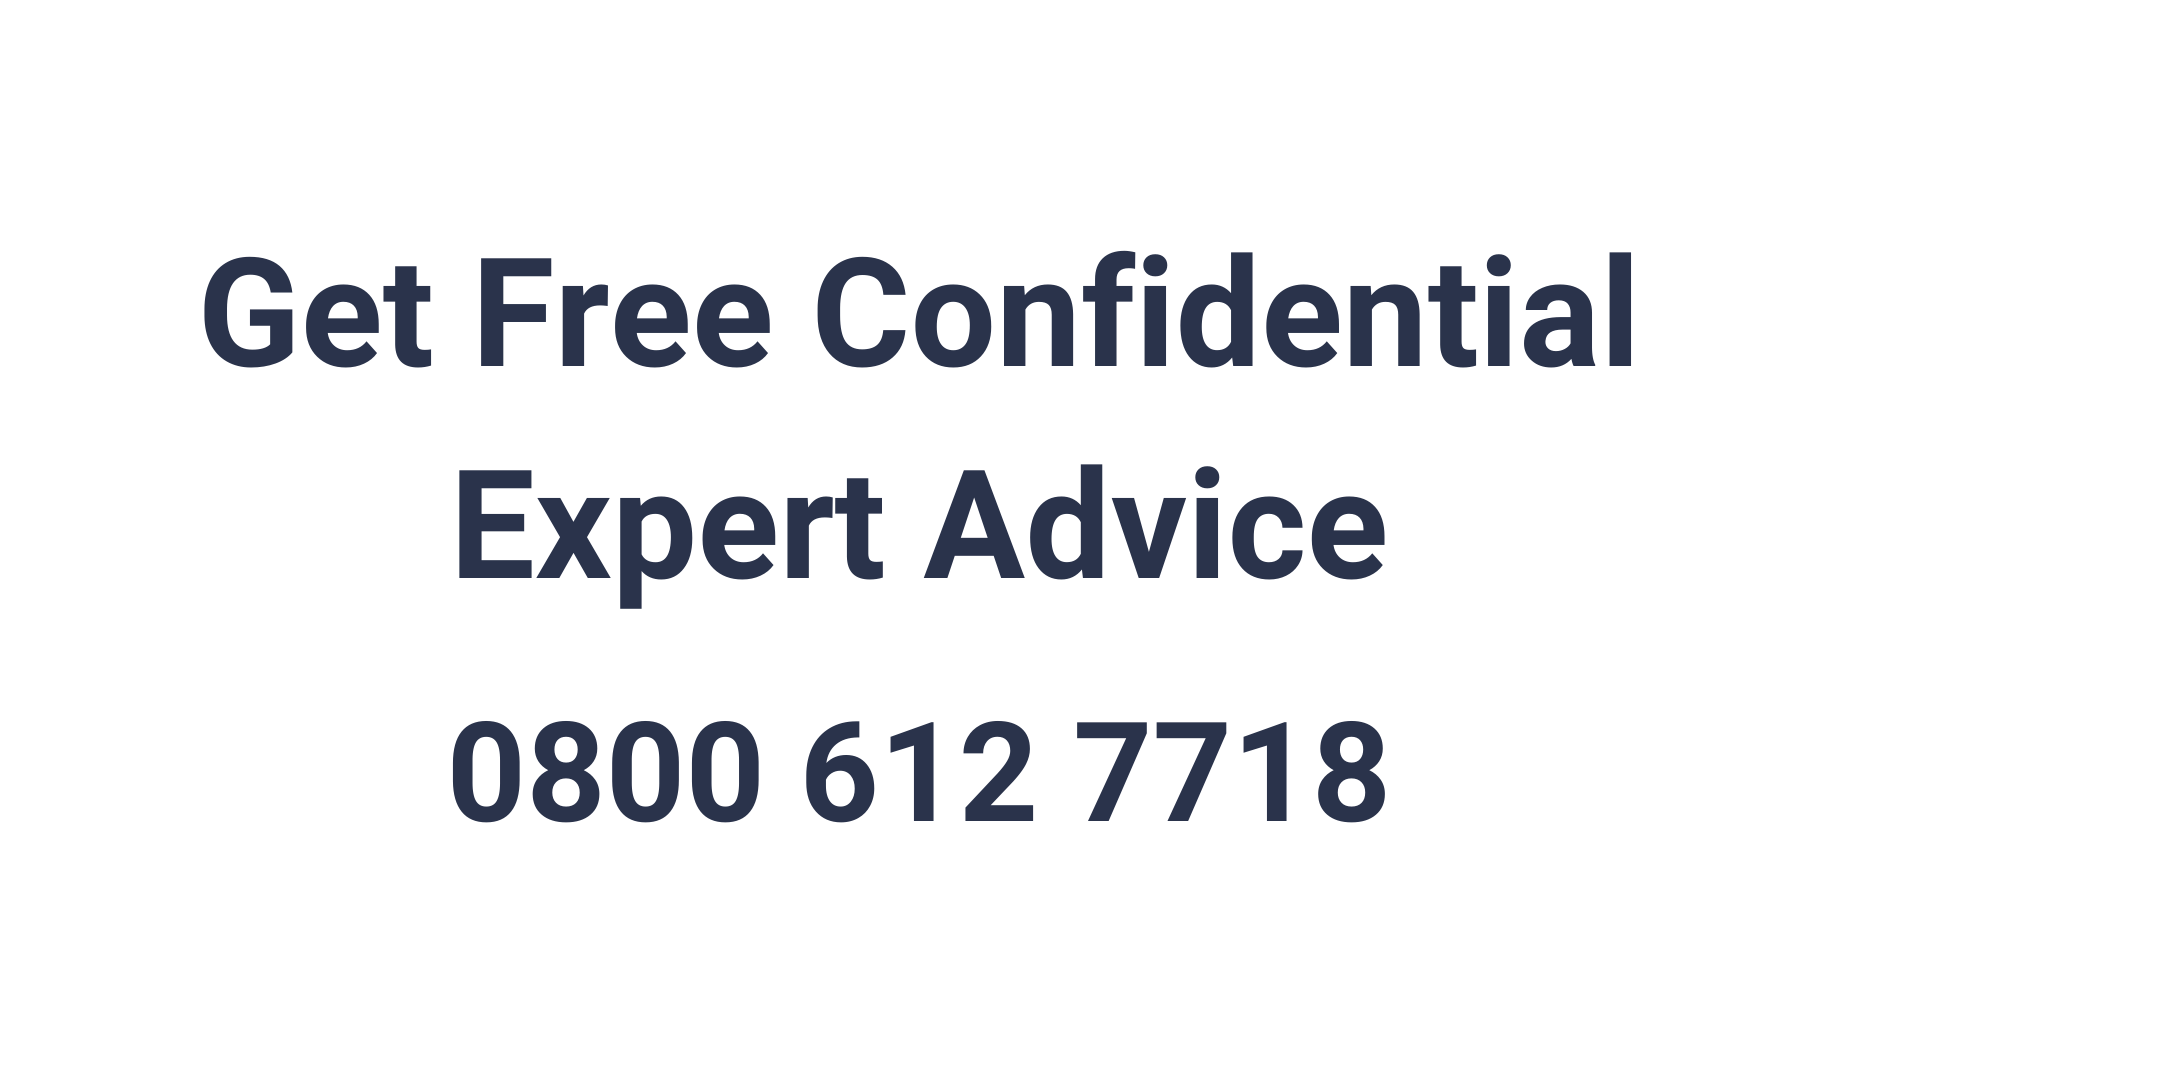 Get Free Confidential Expert Advice